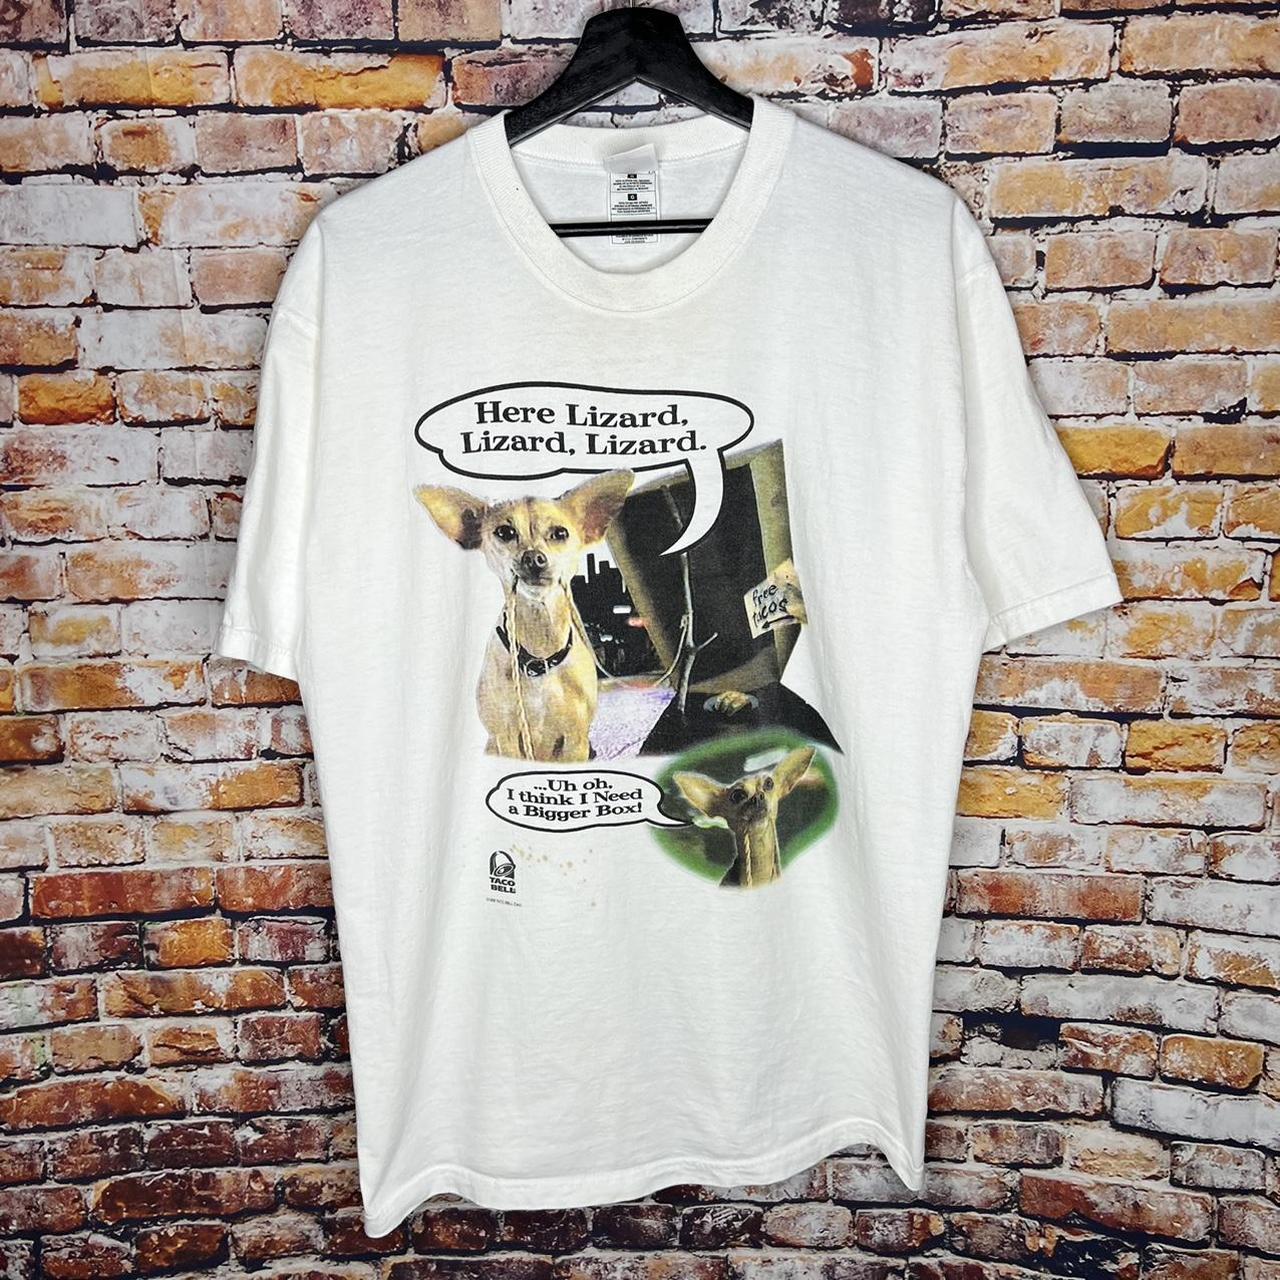 Vintage Taco Bell Chihuahua Here Lizard 1998 Promo T... - Depop